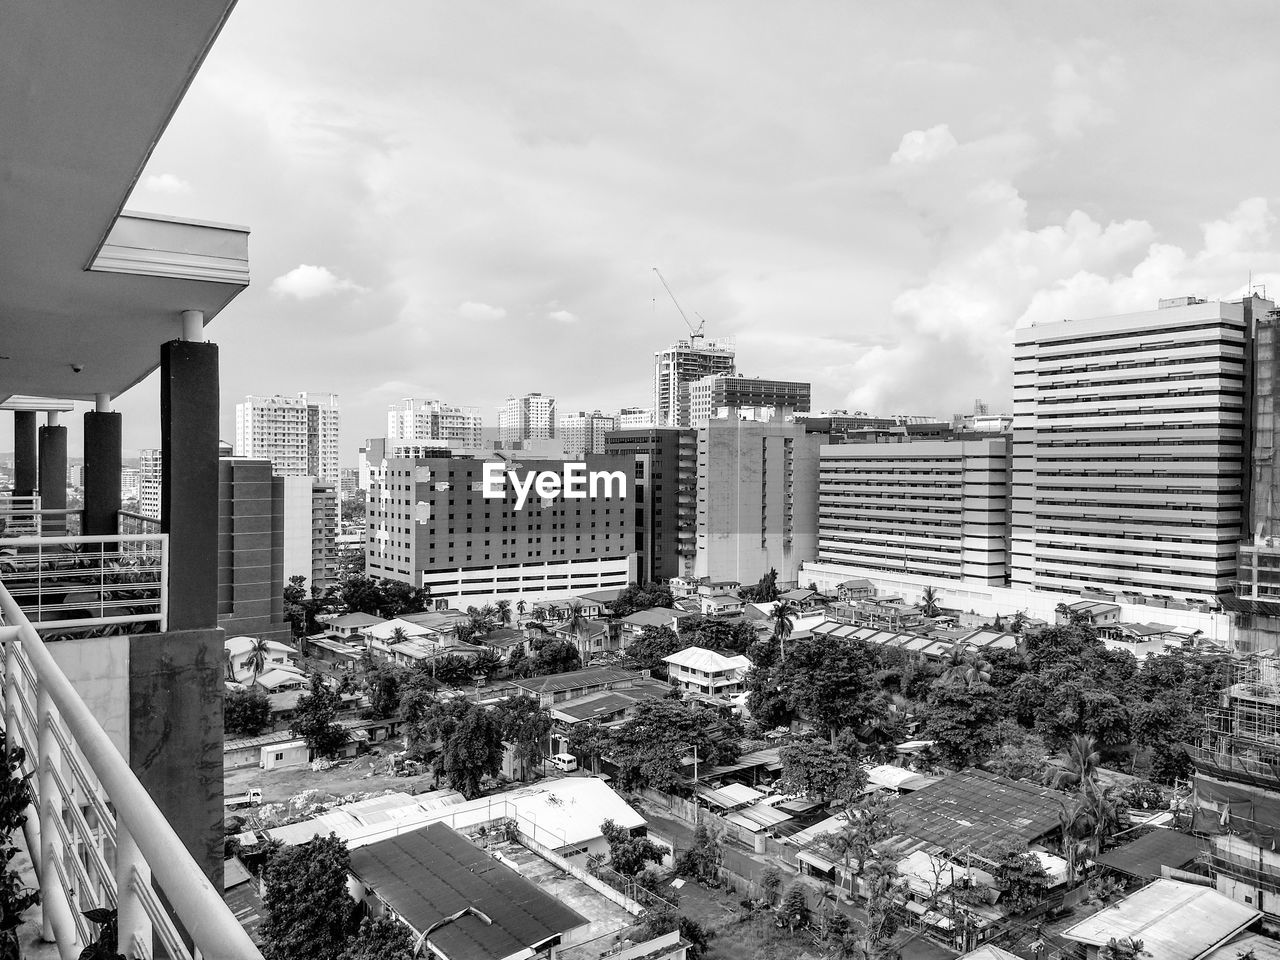 architecture, building exterior, built structure, city, urban area, building, skyline, cityscape, sky, metropolis, office building exterior, skyscraper, black and white, residential area, downtown, metropolitan area, residential district, tower block, cloud, landscape, monochrome photography, monochrome, nature, urban skyline, city life, high angle view, no people, office, day, neighbourhood, outdoors, development, travel destinations, downtown district, transportation, street